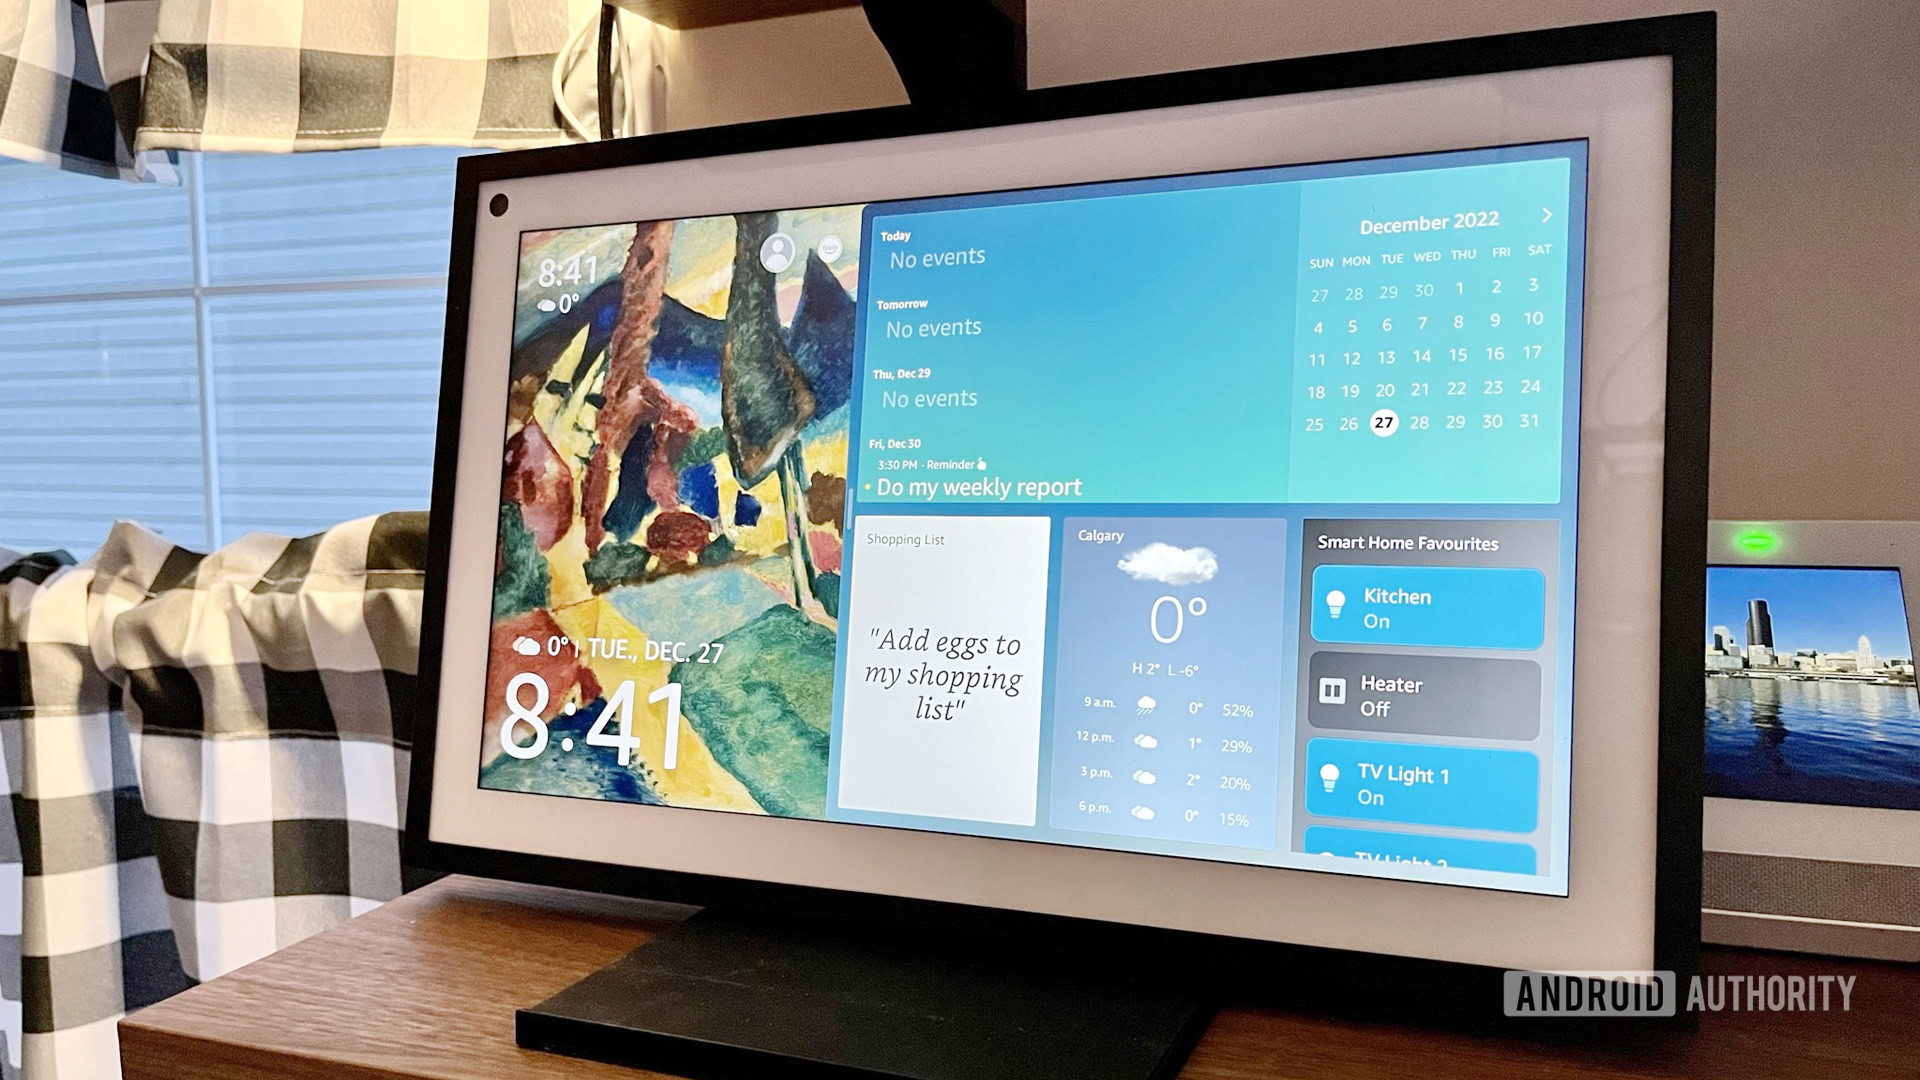 s $250 Echo Show 15 is a smart display for your wall